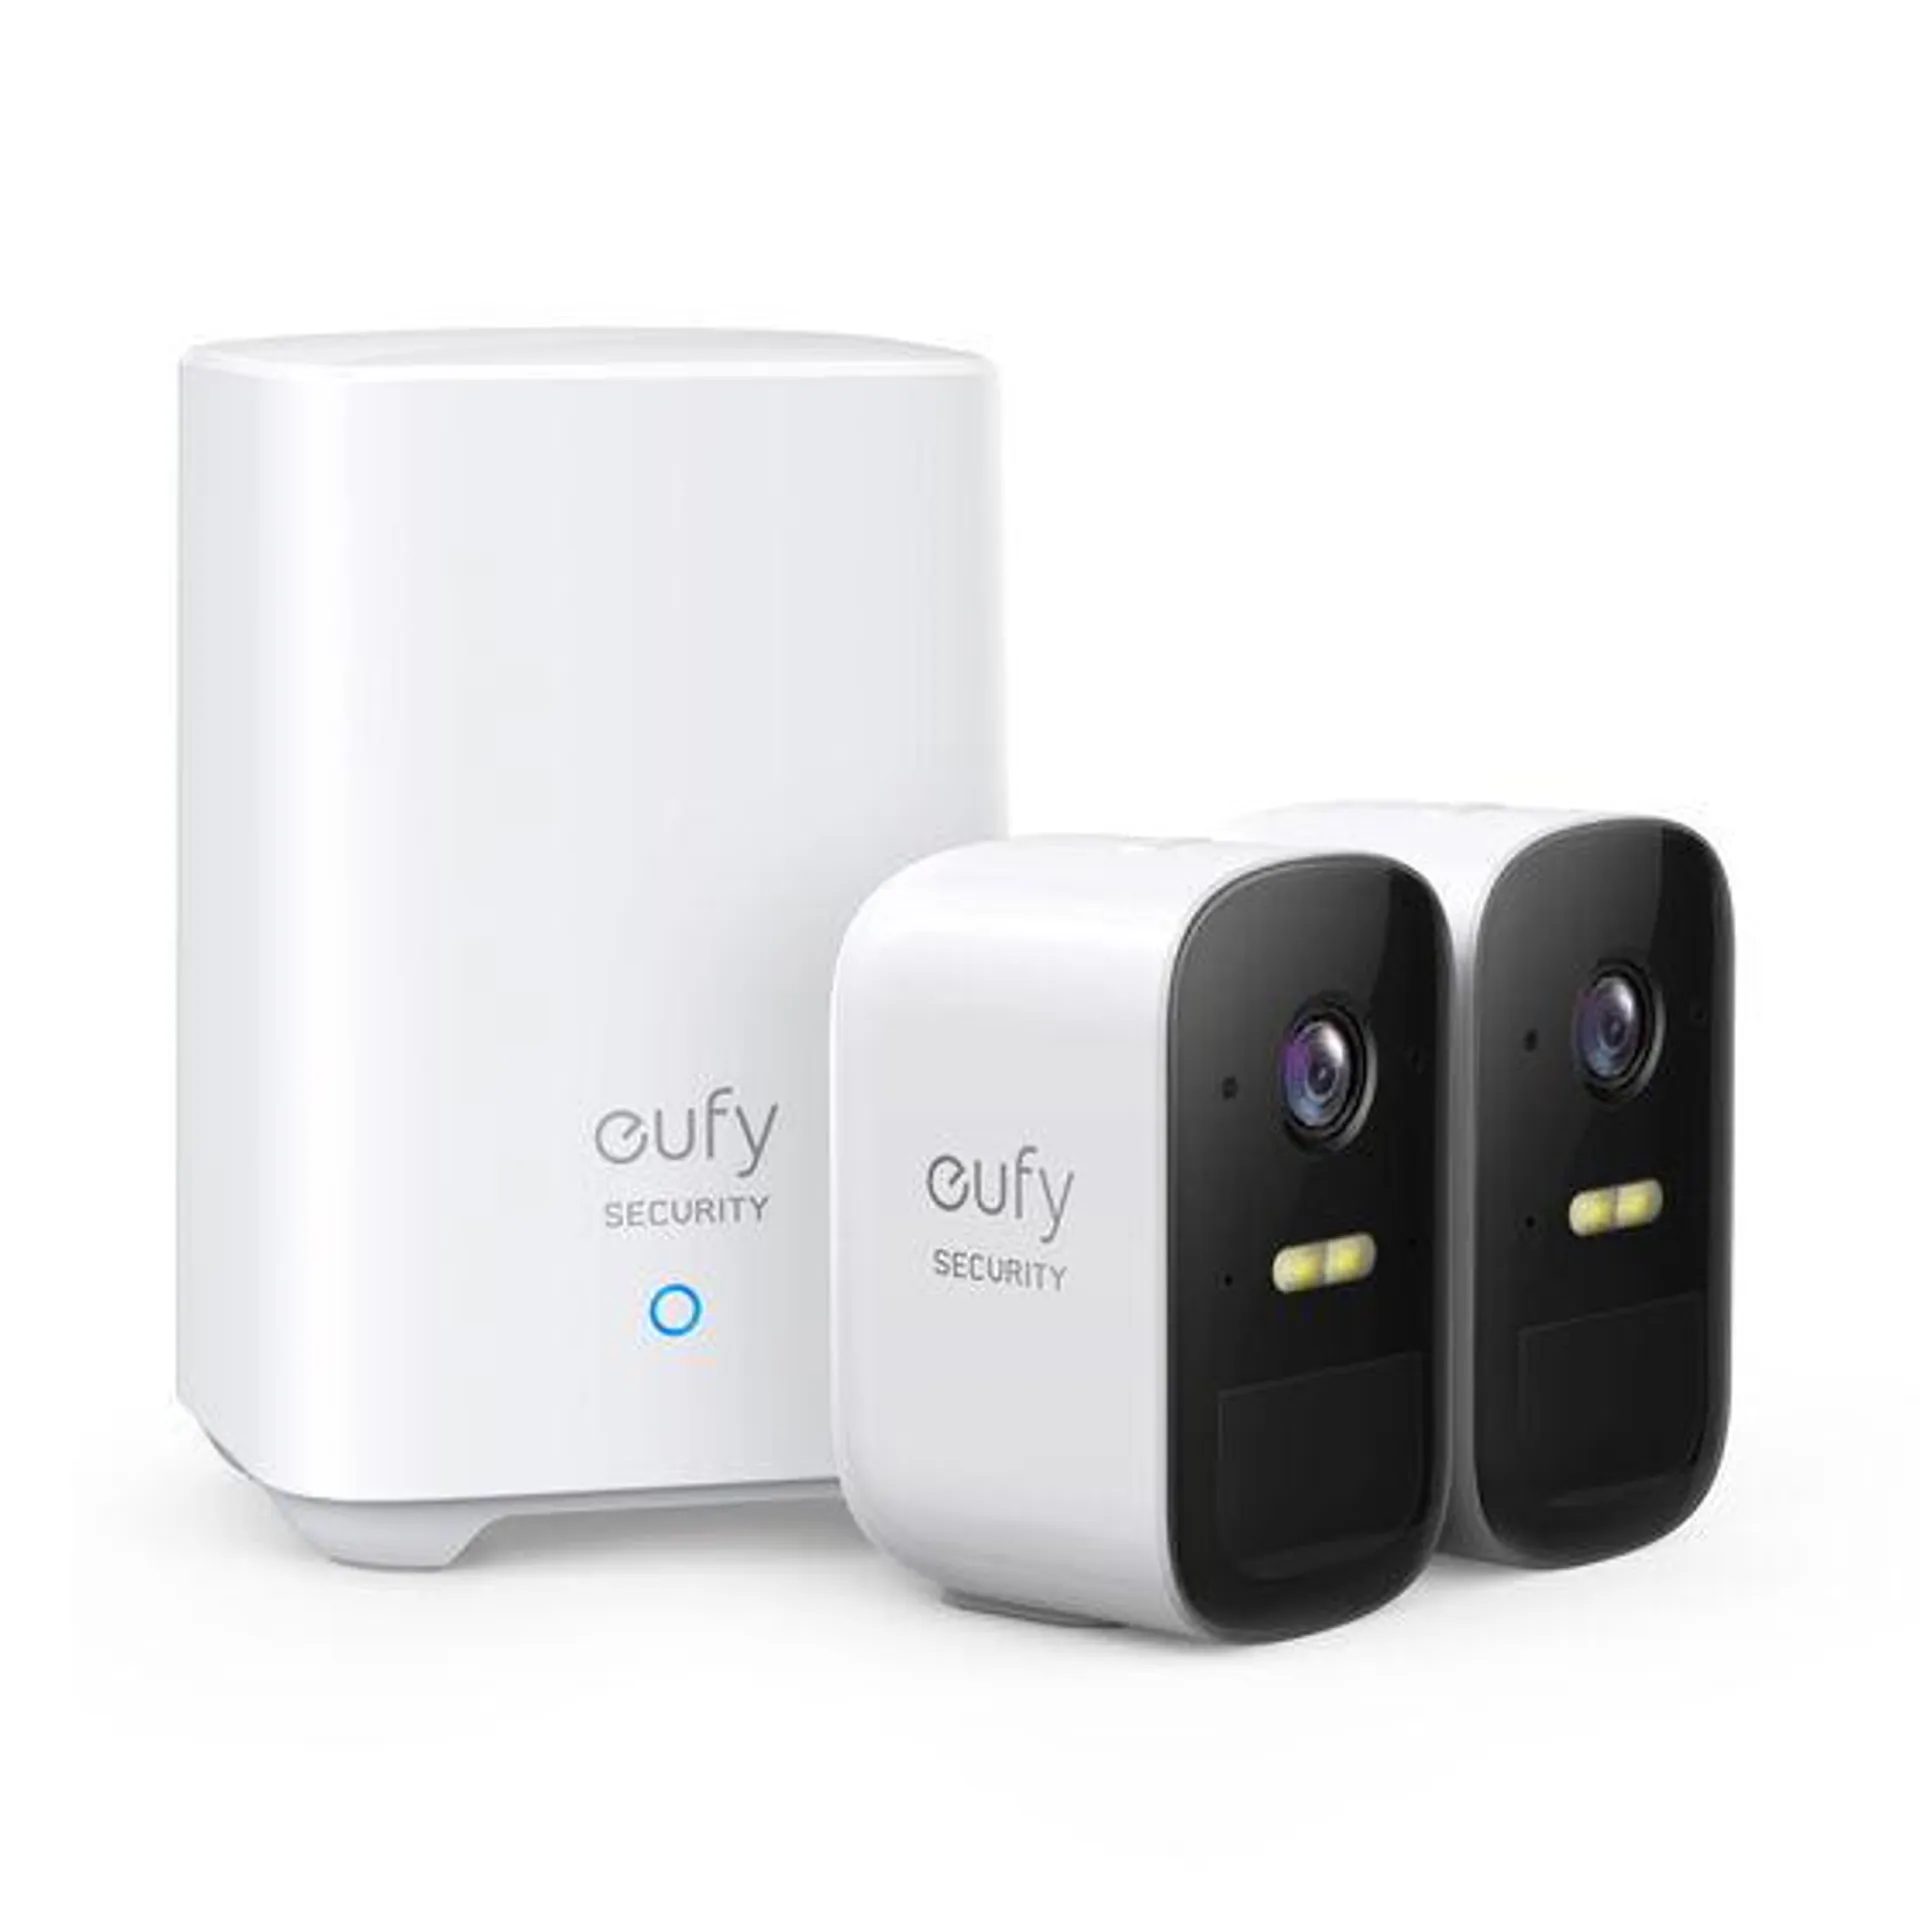 Eufy Wireless 1080p Security Camera system 2 Pack - T8831CD3